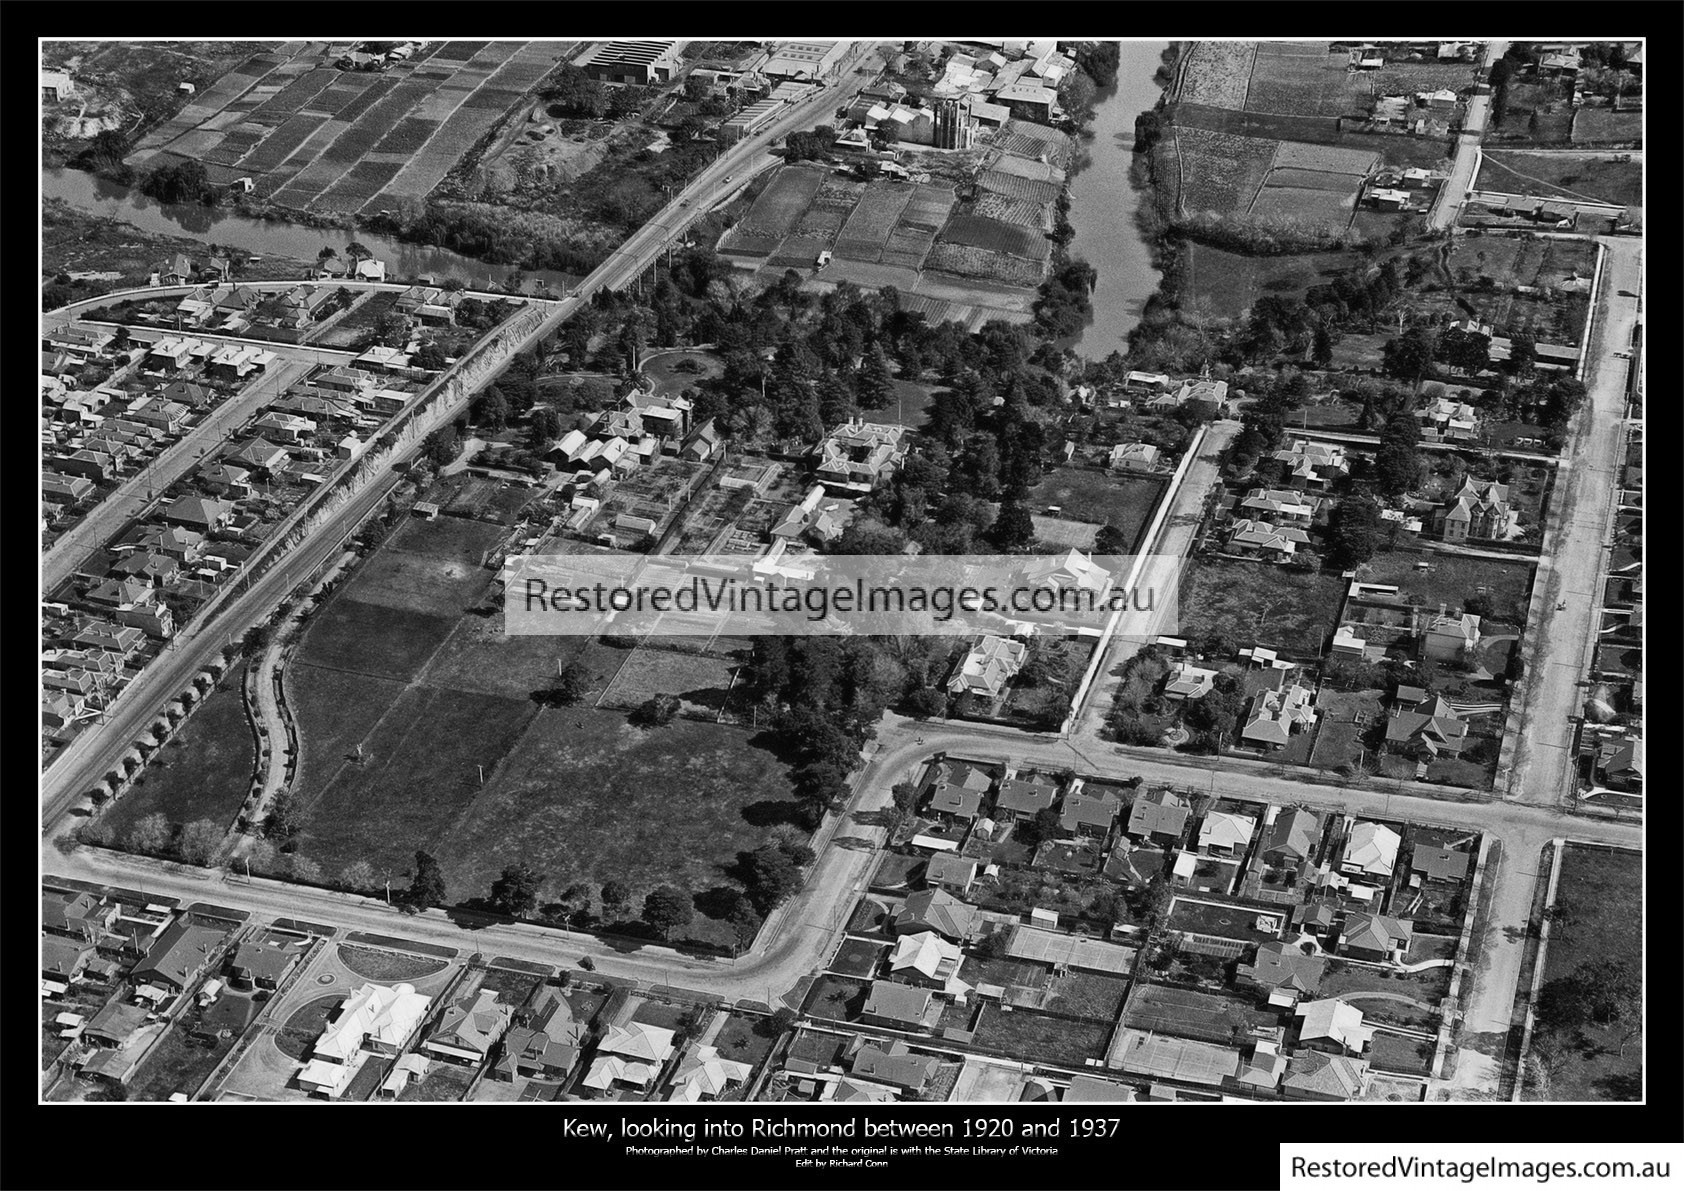 Kew Looking Into Richmond 1920 To 1937